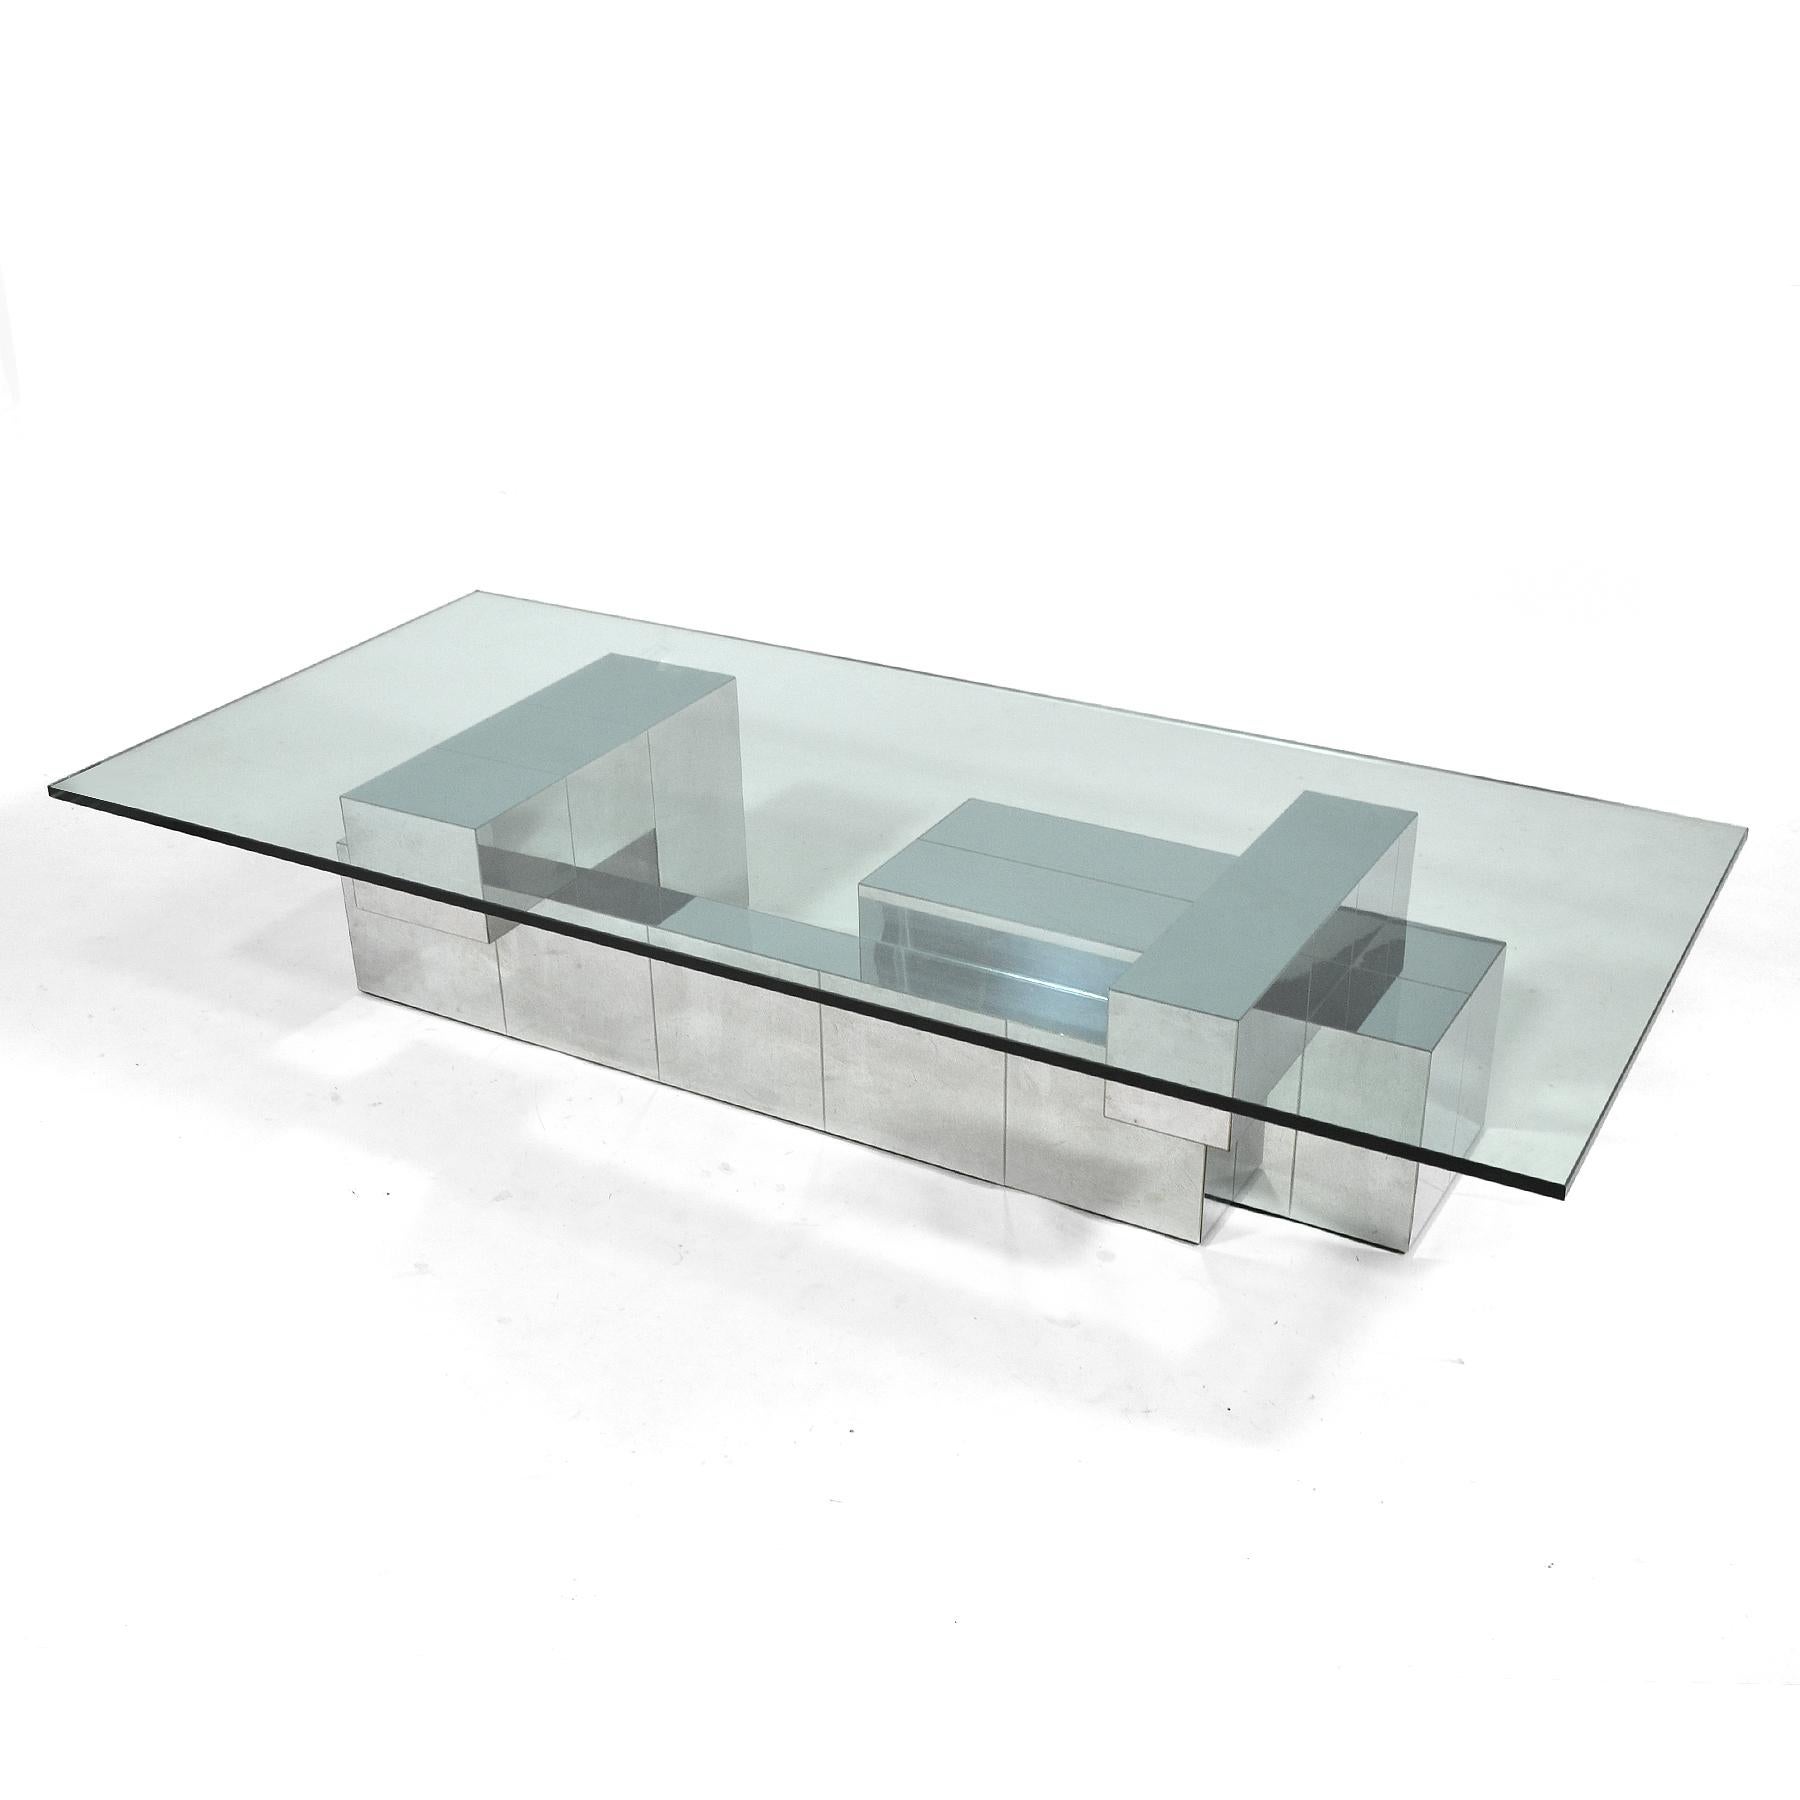 This impressive, oversize Paul Evans coffee table by Directional has not only a terrific scale, it also features a wonderful architectural composition clad in chrome plated patchwork. It's not only the largest 